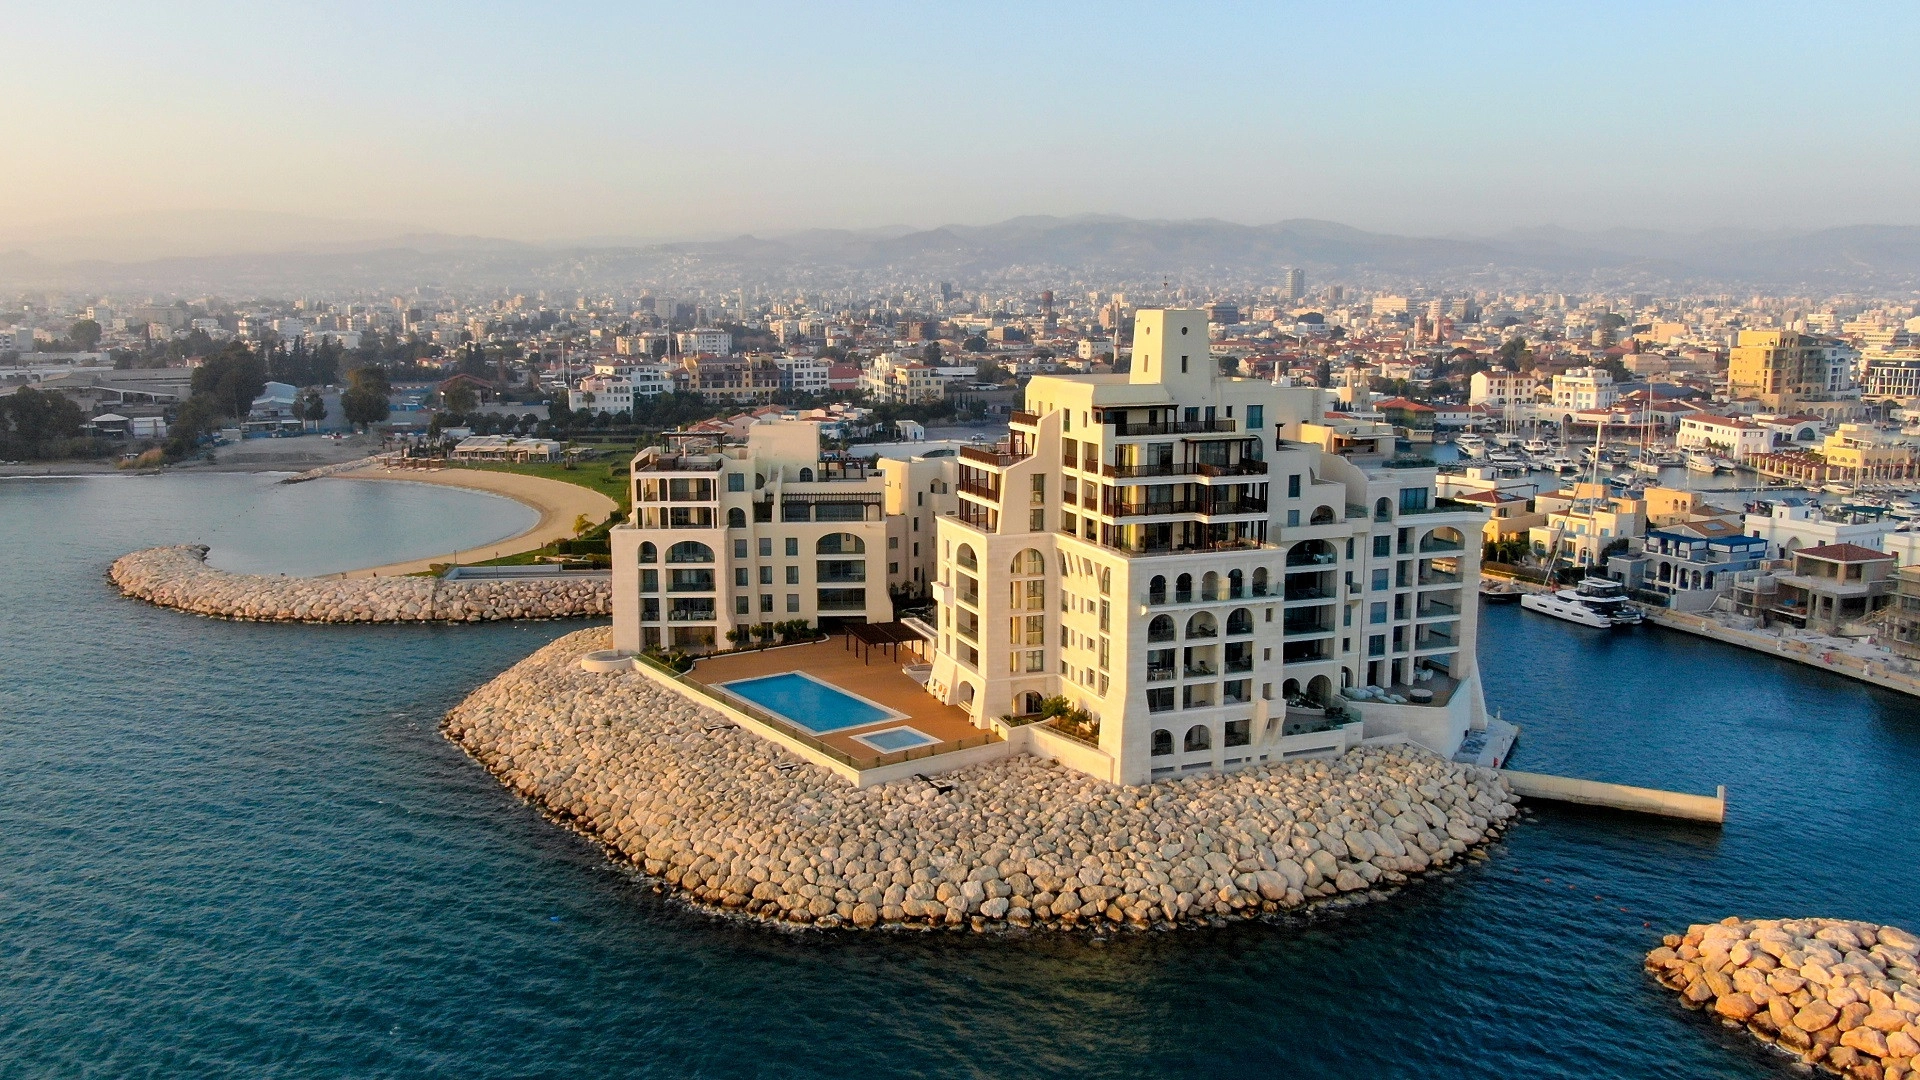 3 Bedroom Apartment for Sale in Limassol – Marina